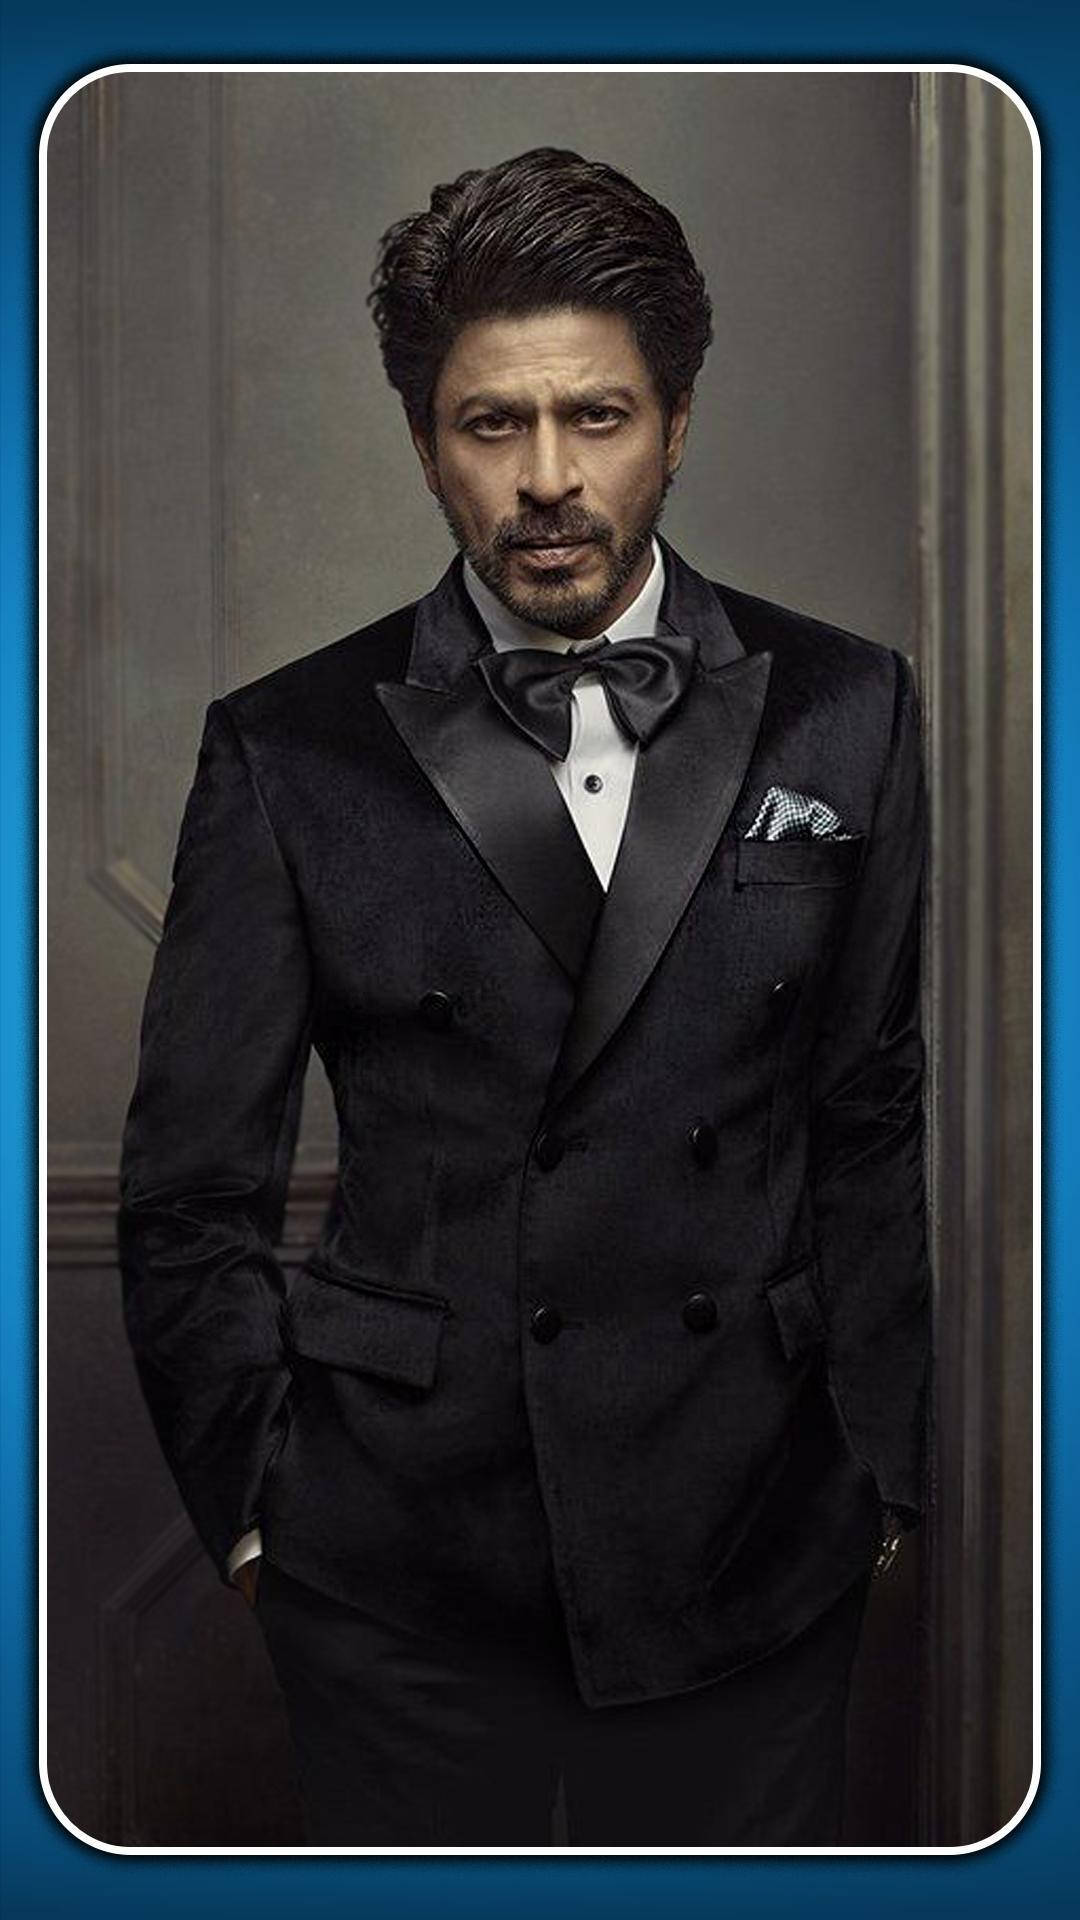 Shahrukh Khan Hd In Formal Suit Background